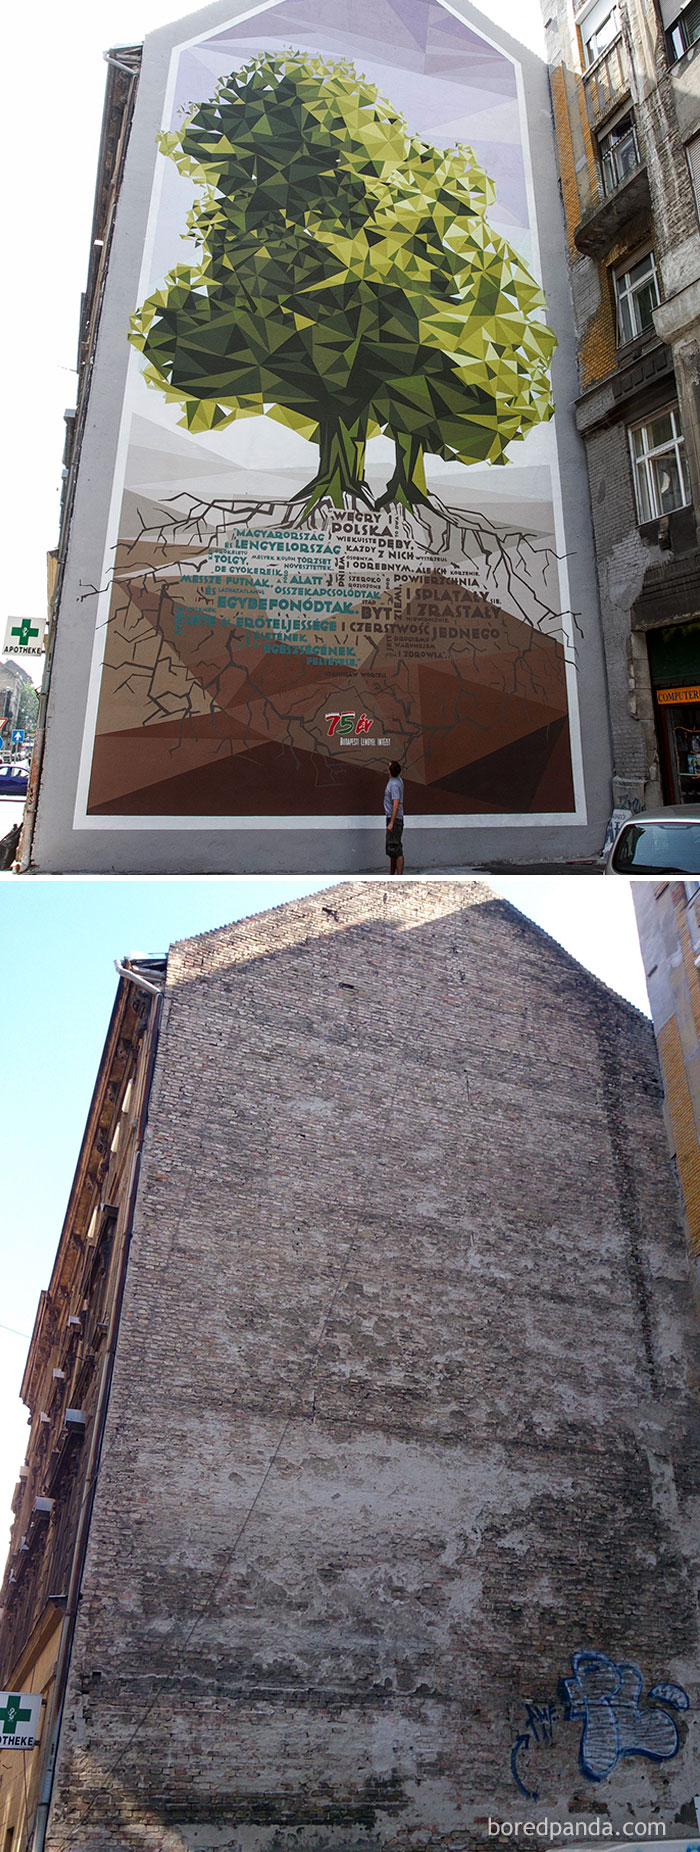 before-after-street-art-boring-wall-transformation-5-580df98ae2507__700.jpg